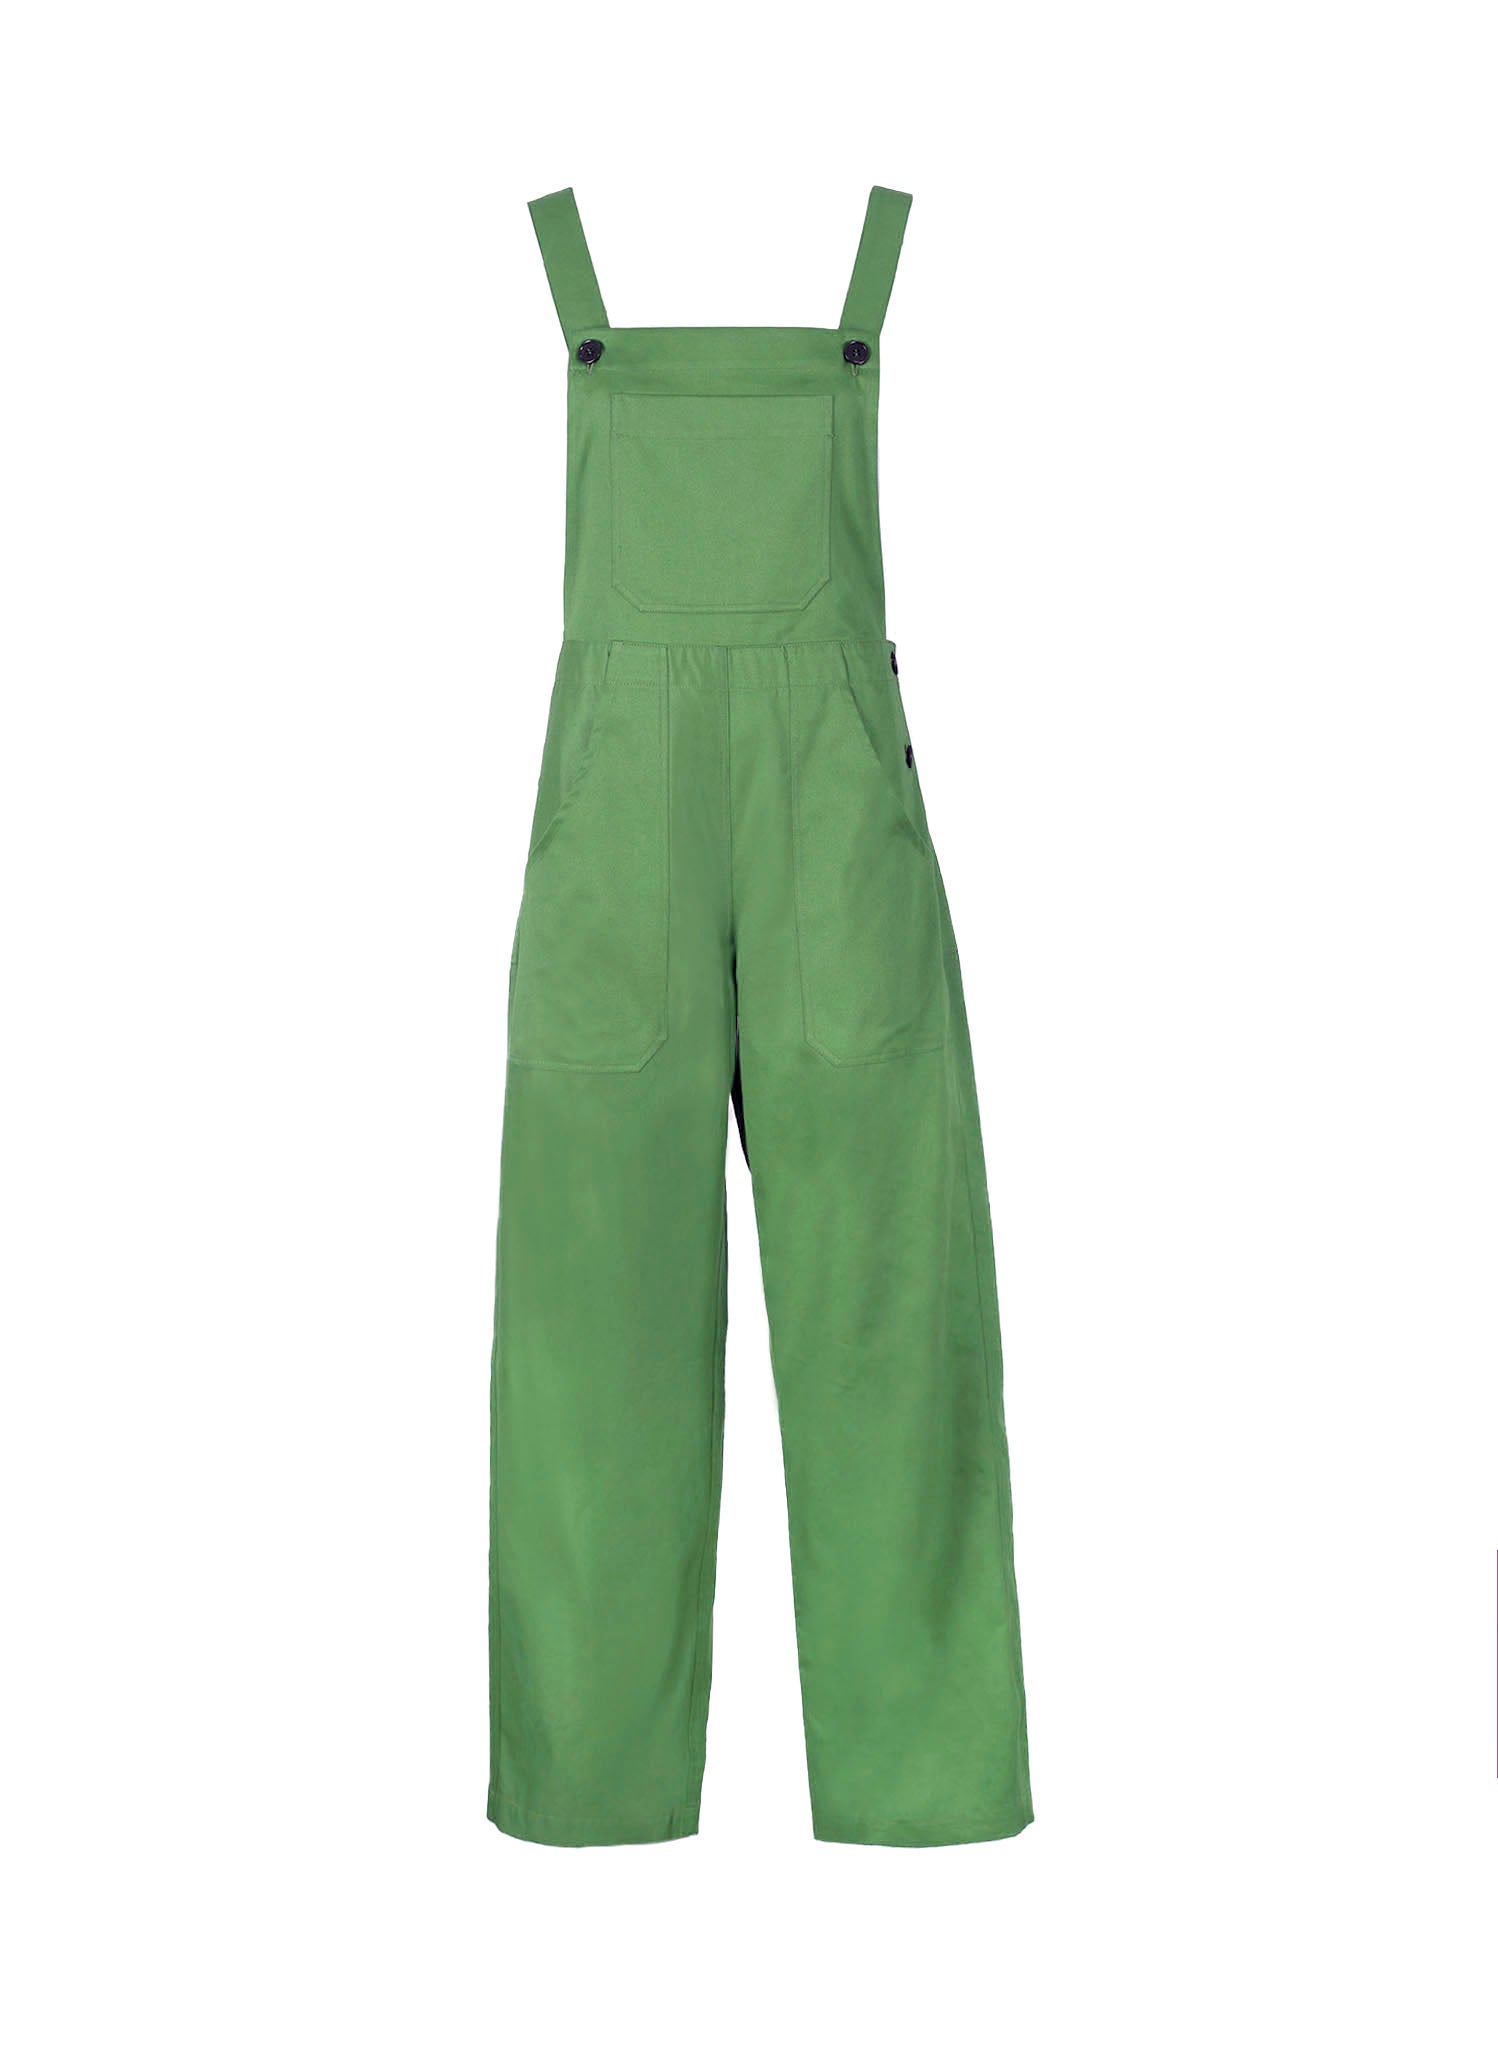 Green women's dungaree trousers